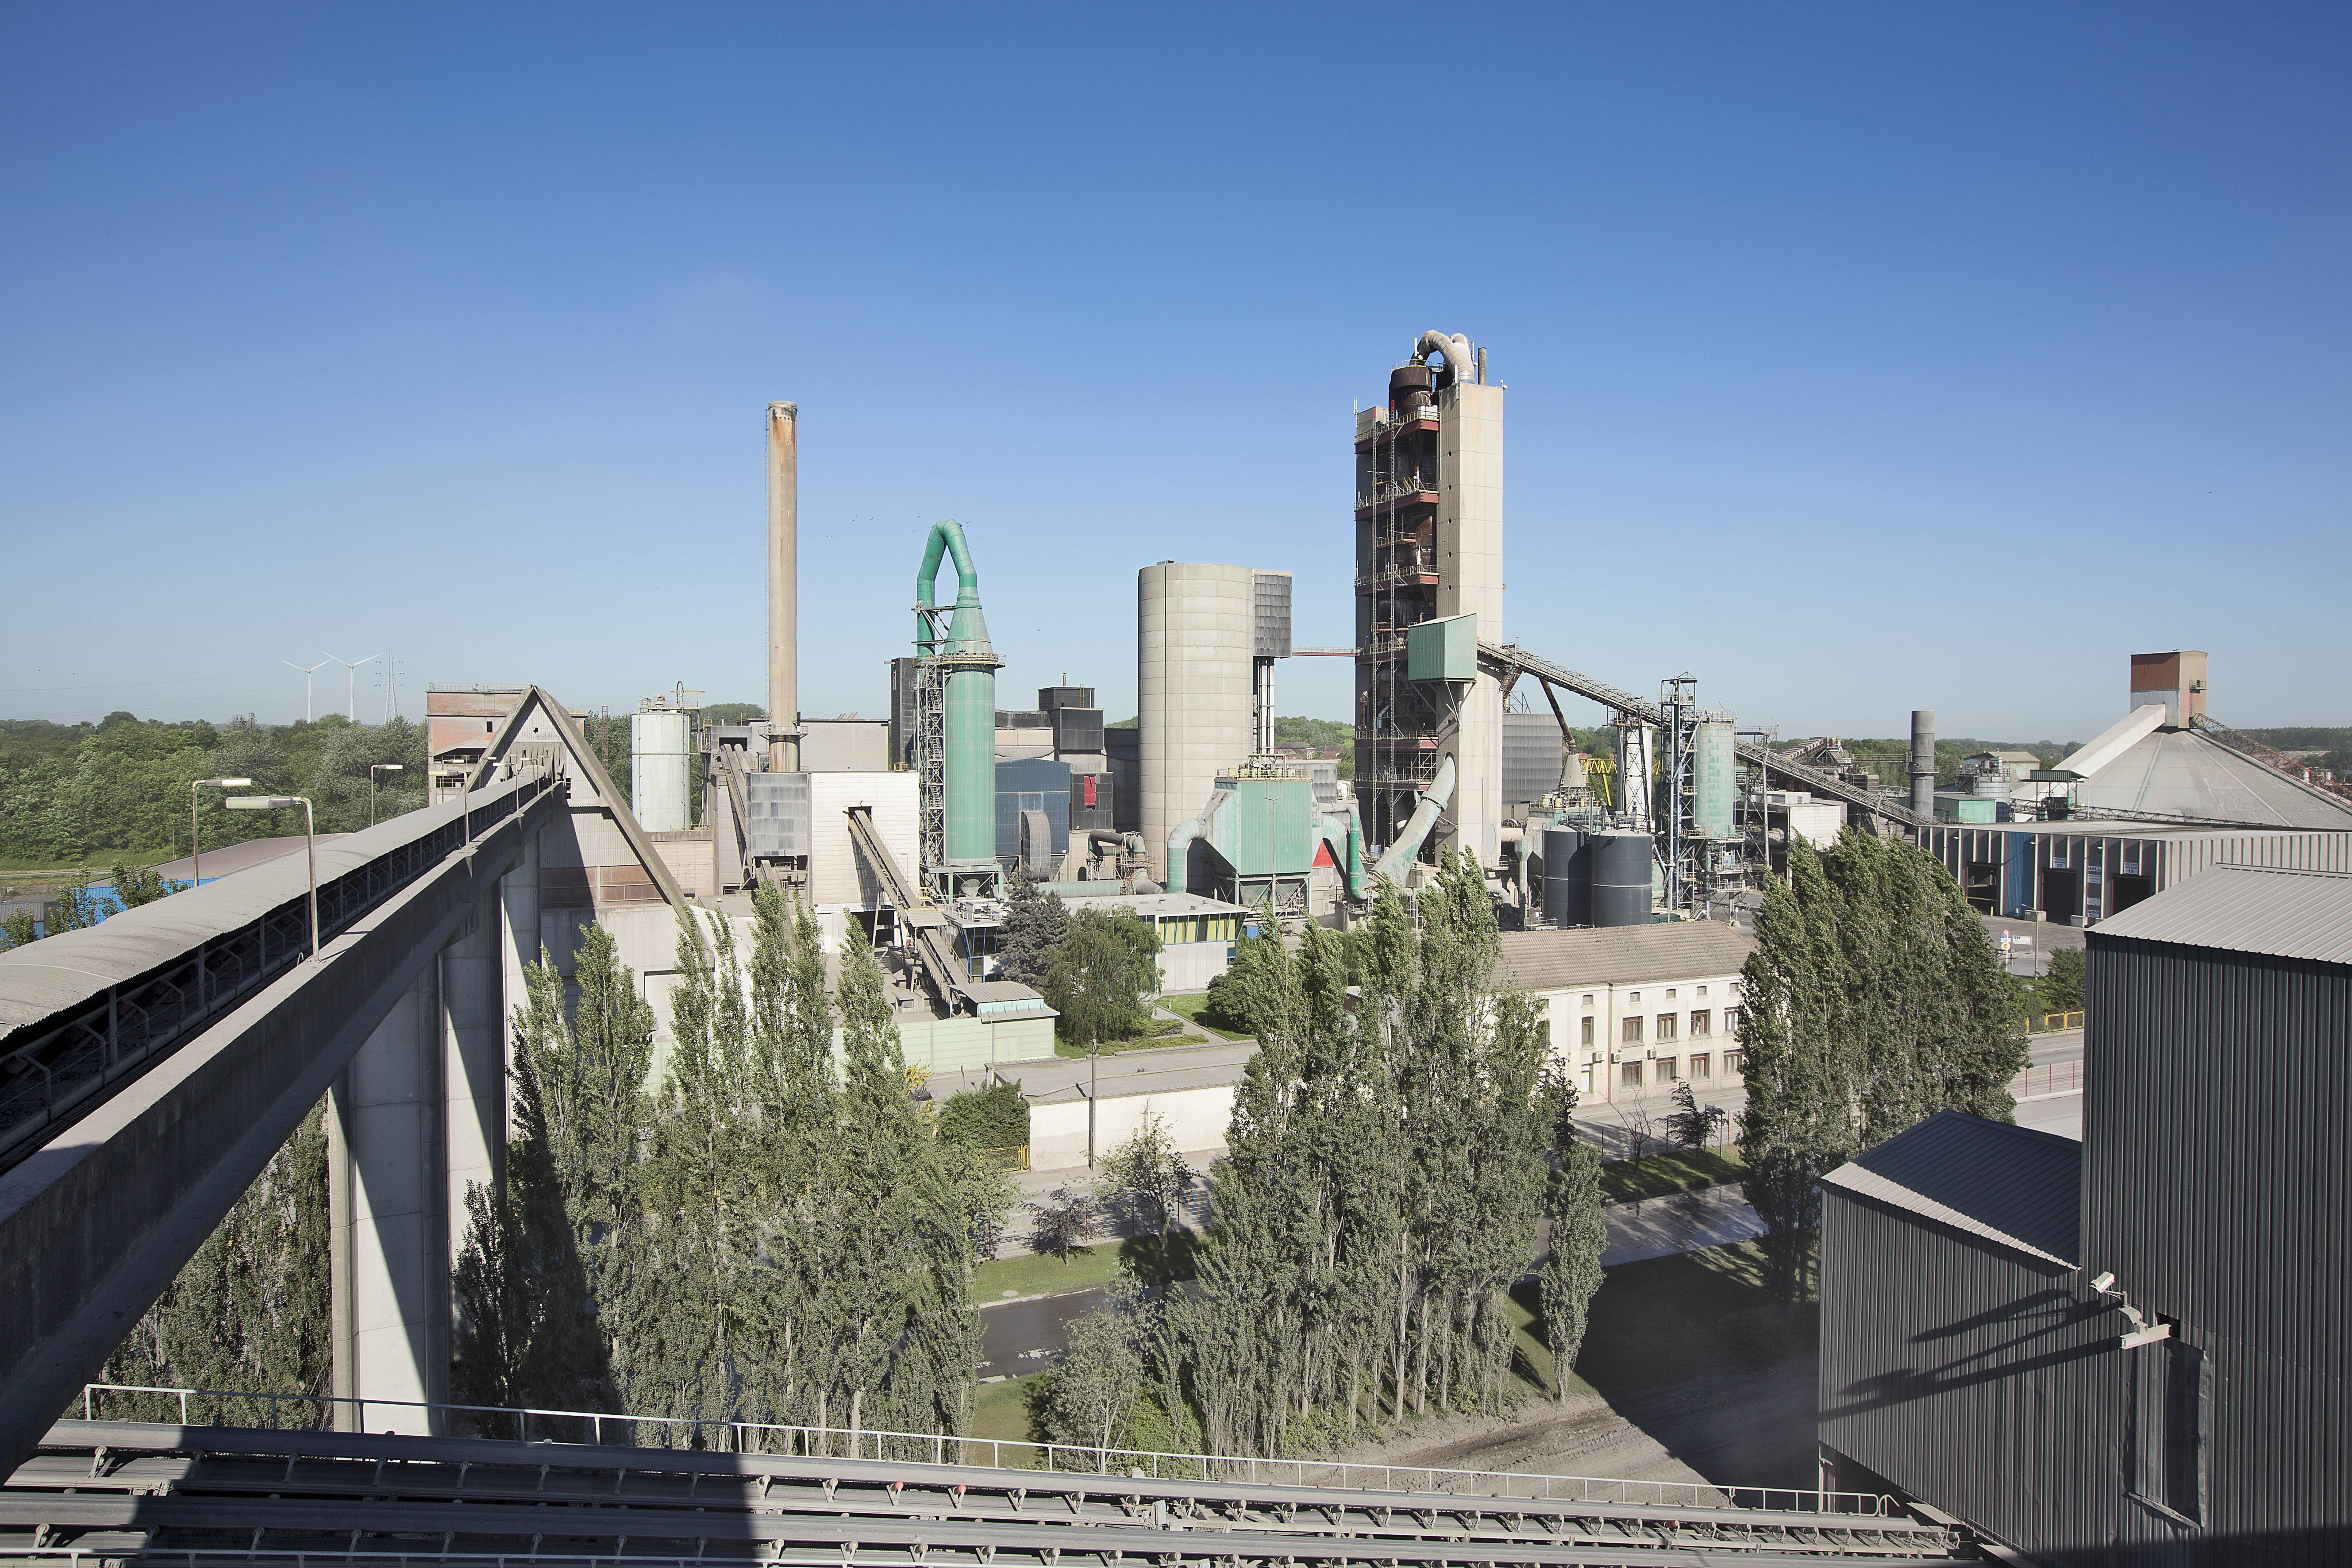 CBR to build one-of-a-kind hybrid carbon capture unit at its Antoing cement plant 